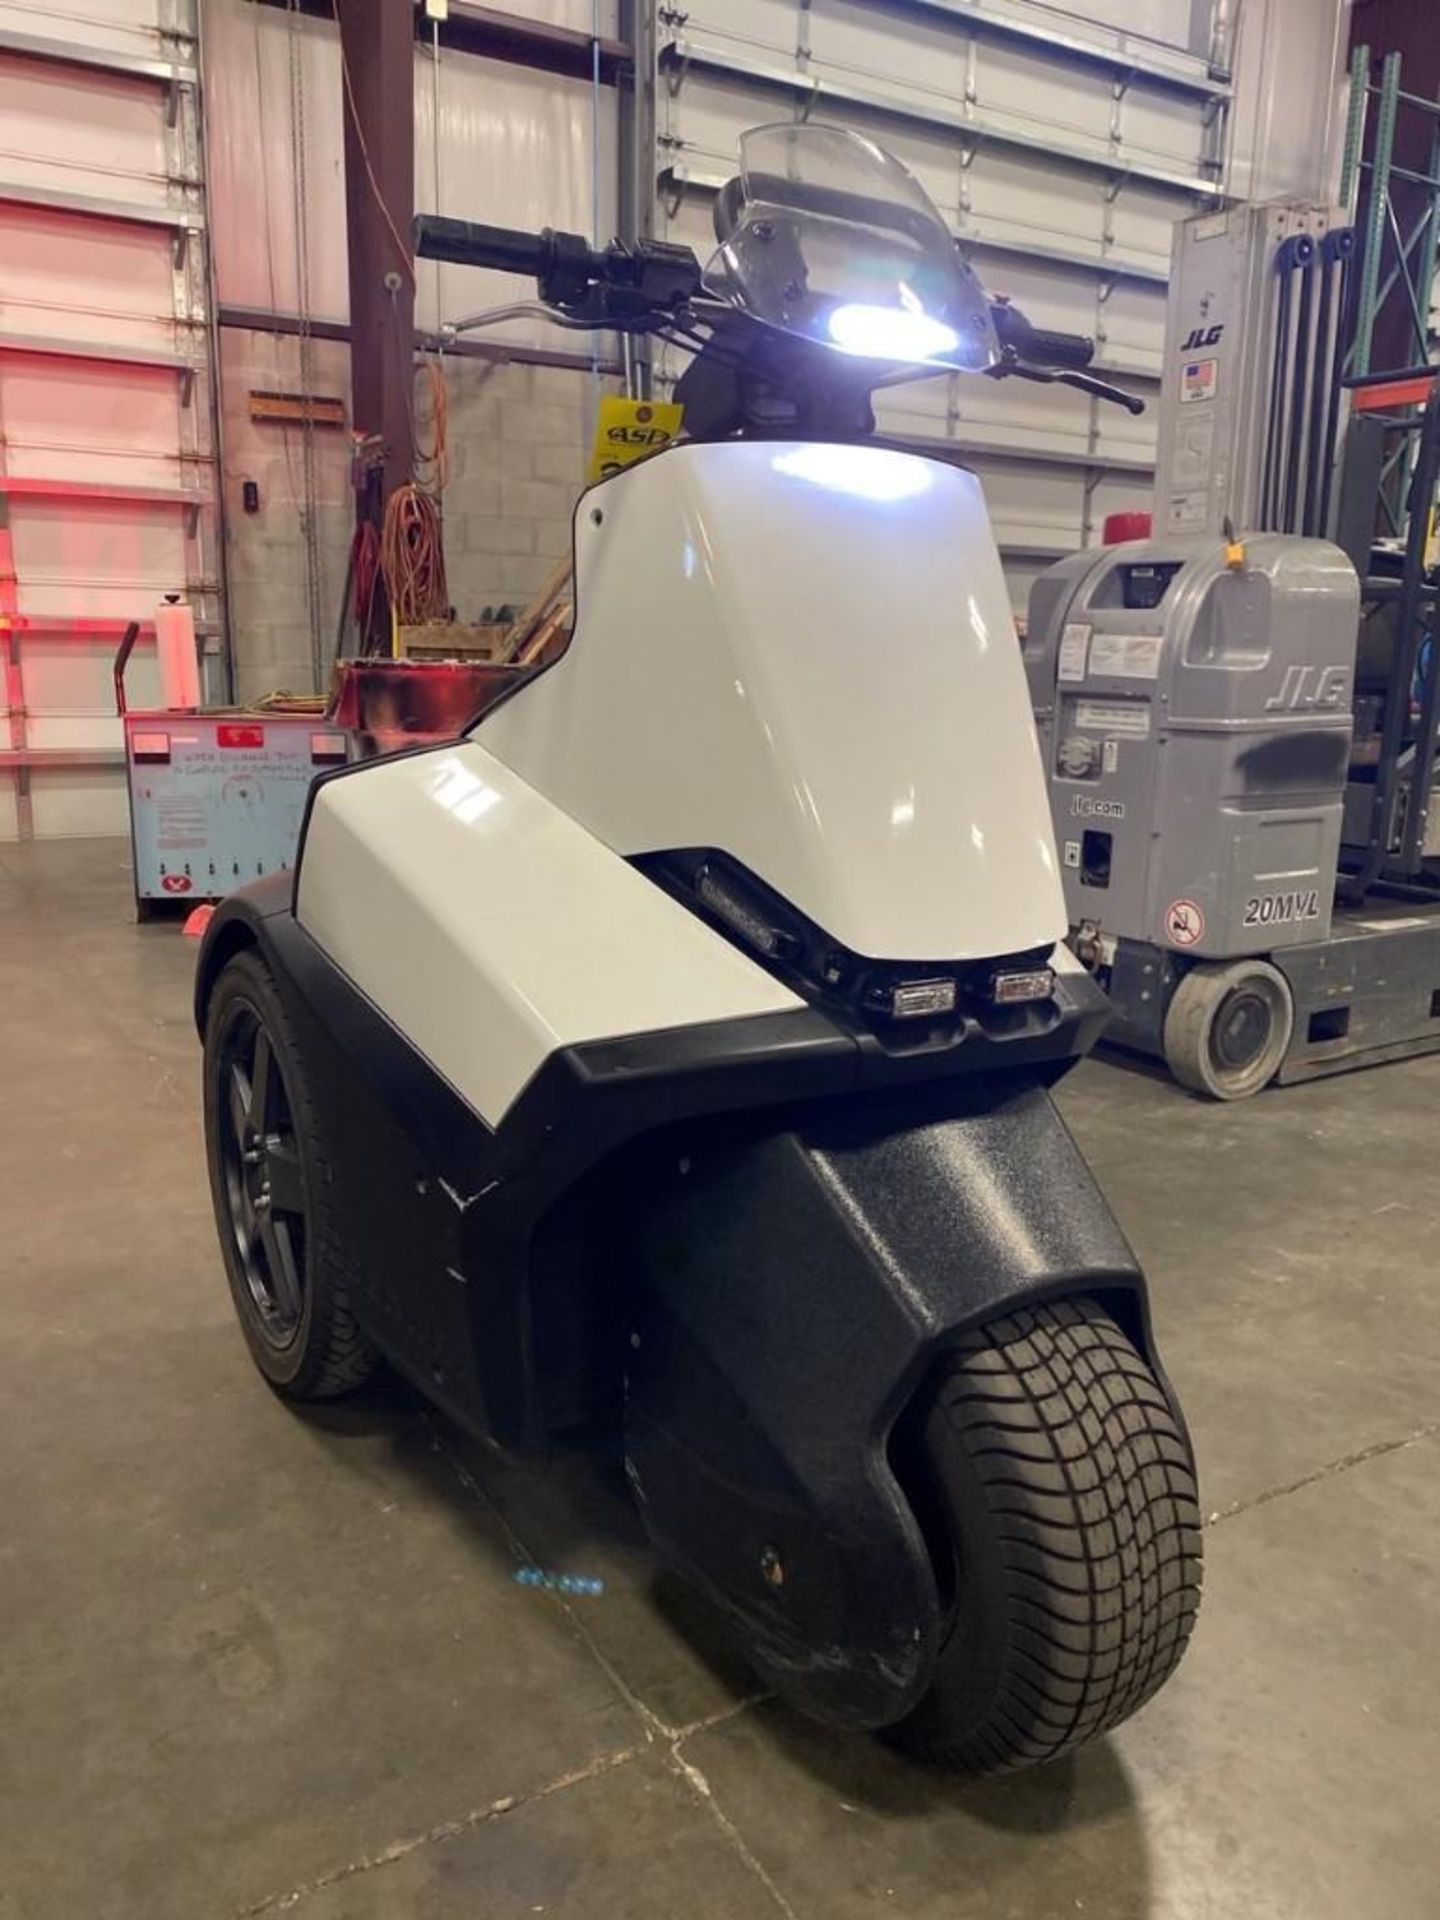 3-WHEEL SEGWAY WITH SIREN, RED WHITE & BLUE LIGHTS, 3,501.4 MILES, RUNS AND DRIVES - Image 7 of 22